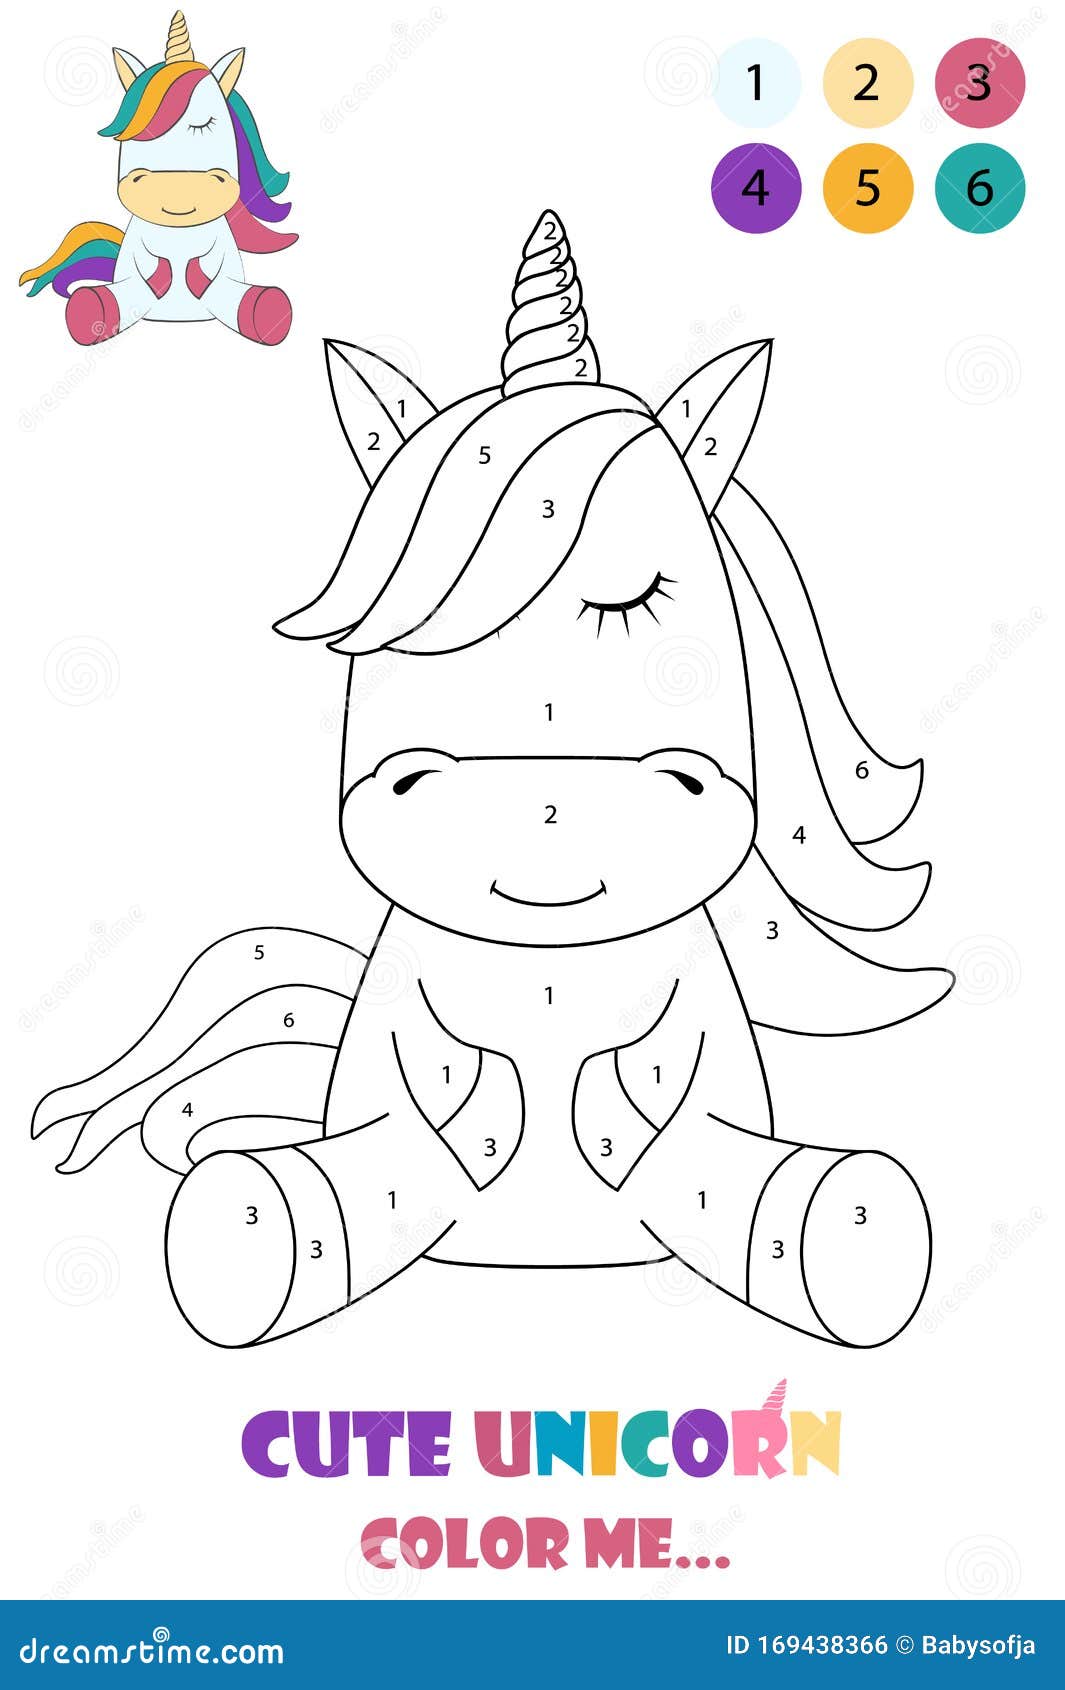 Download Black And White Drawing Of A Unicorn For Coloring Stock Vector Illustration Of Fairytale Rainbow 169438366